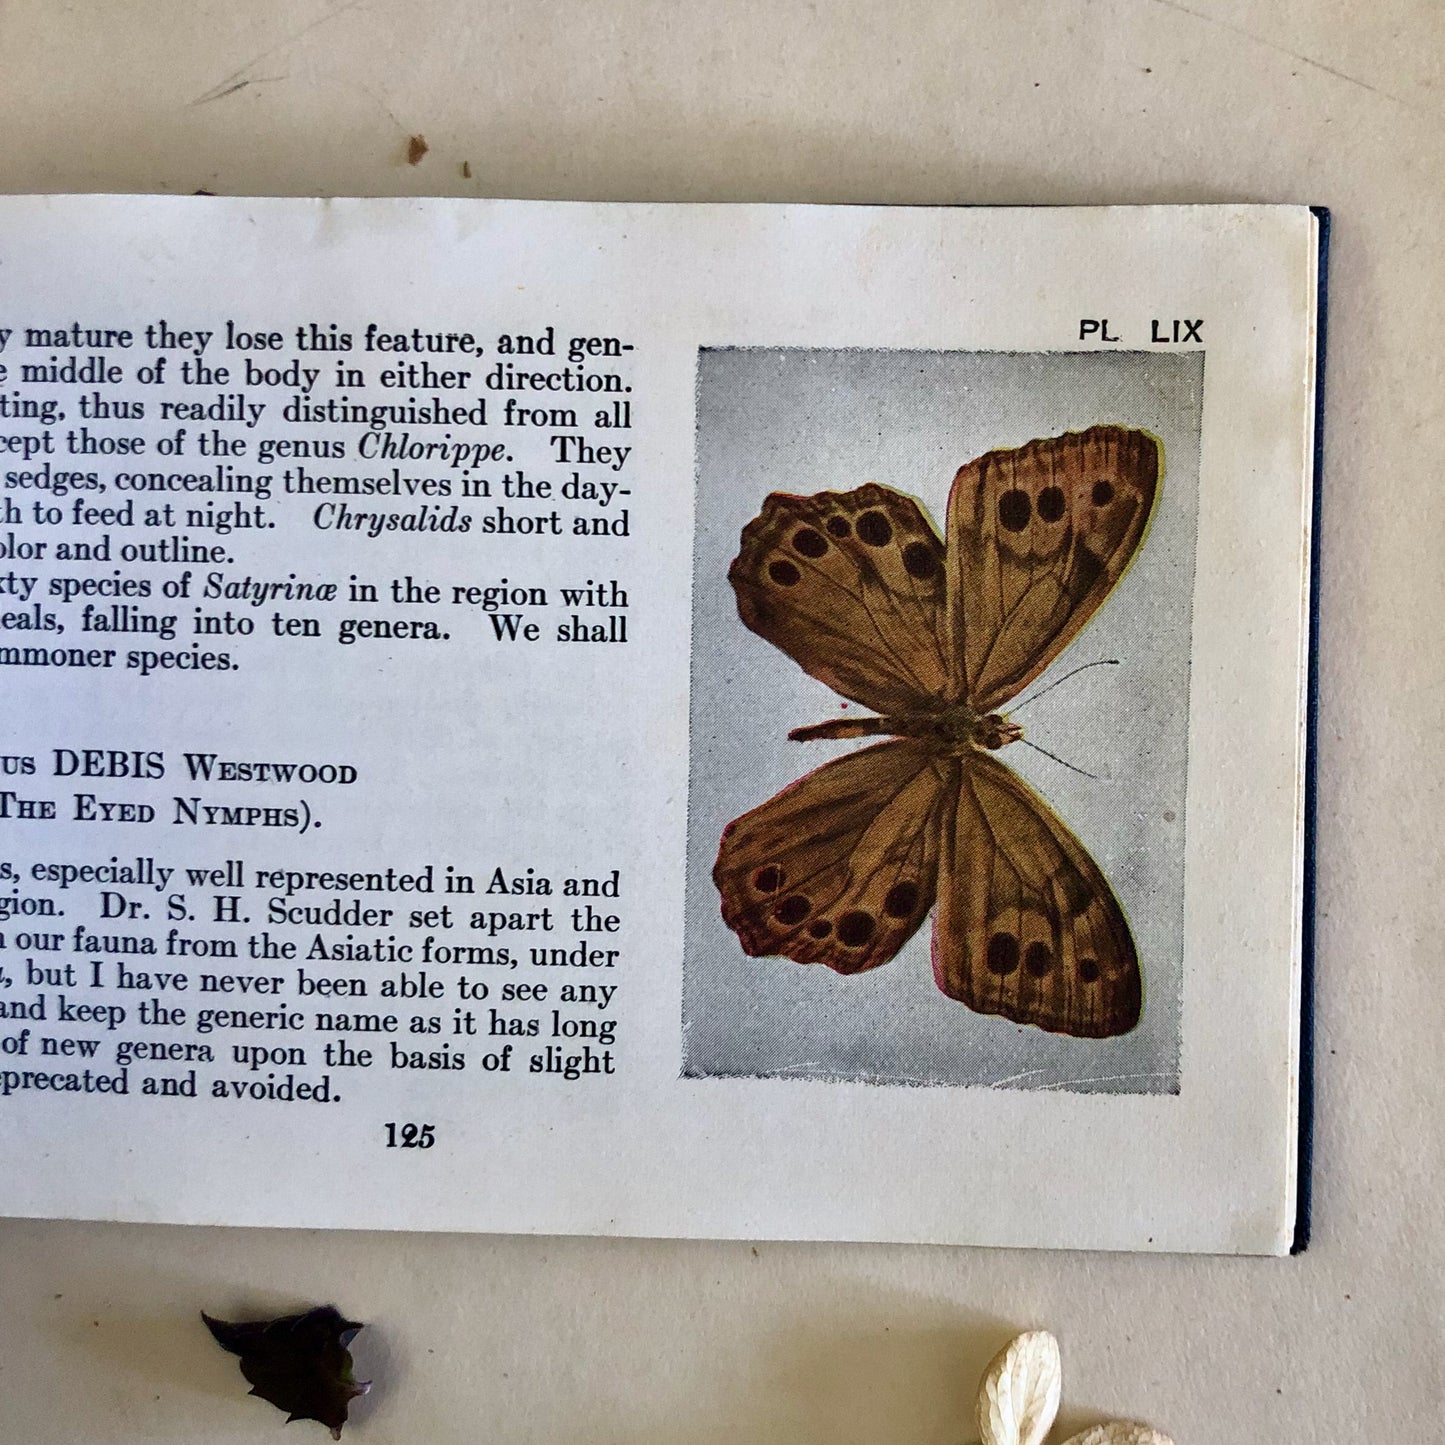 Butterfly Guide Antique Pocket Manual (1920)